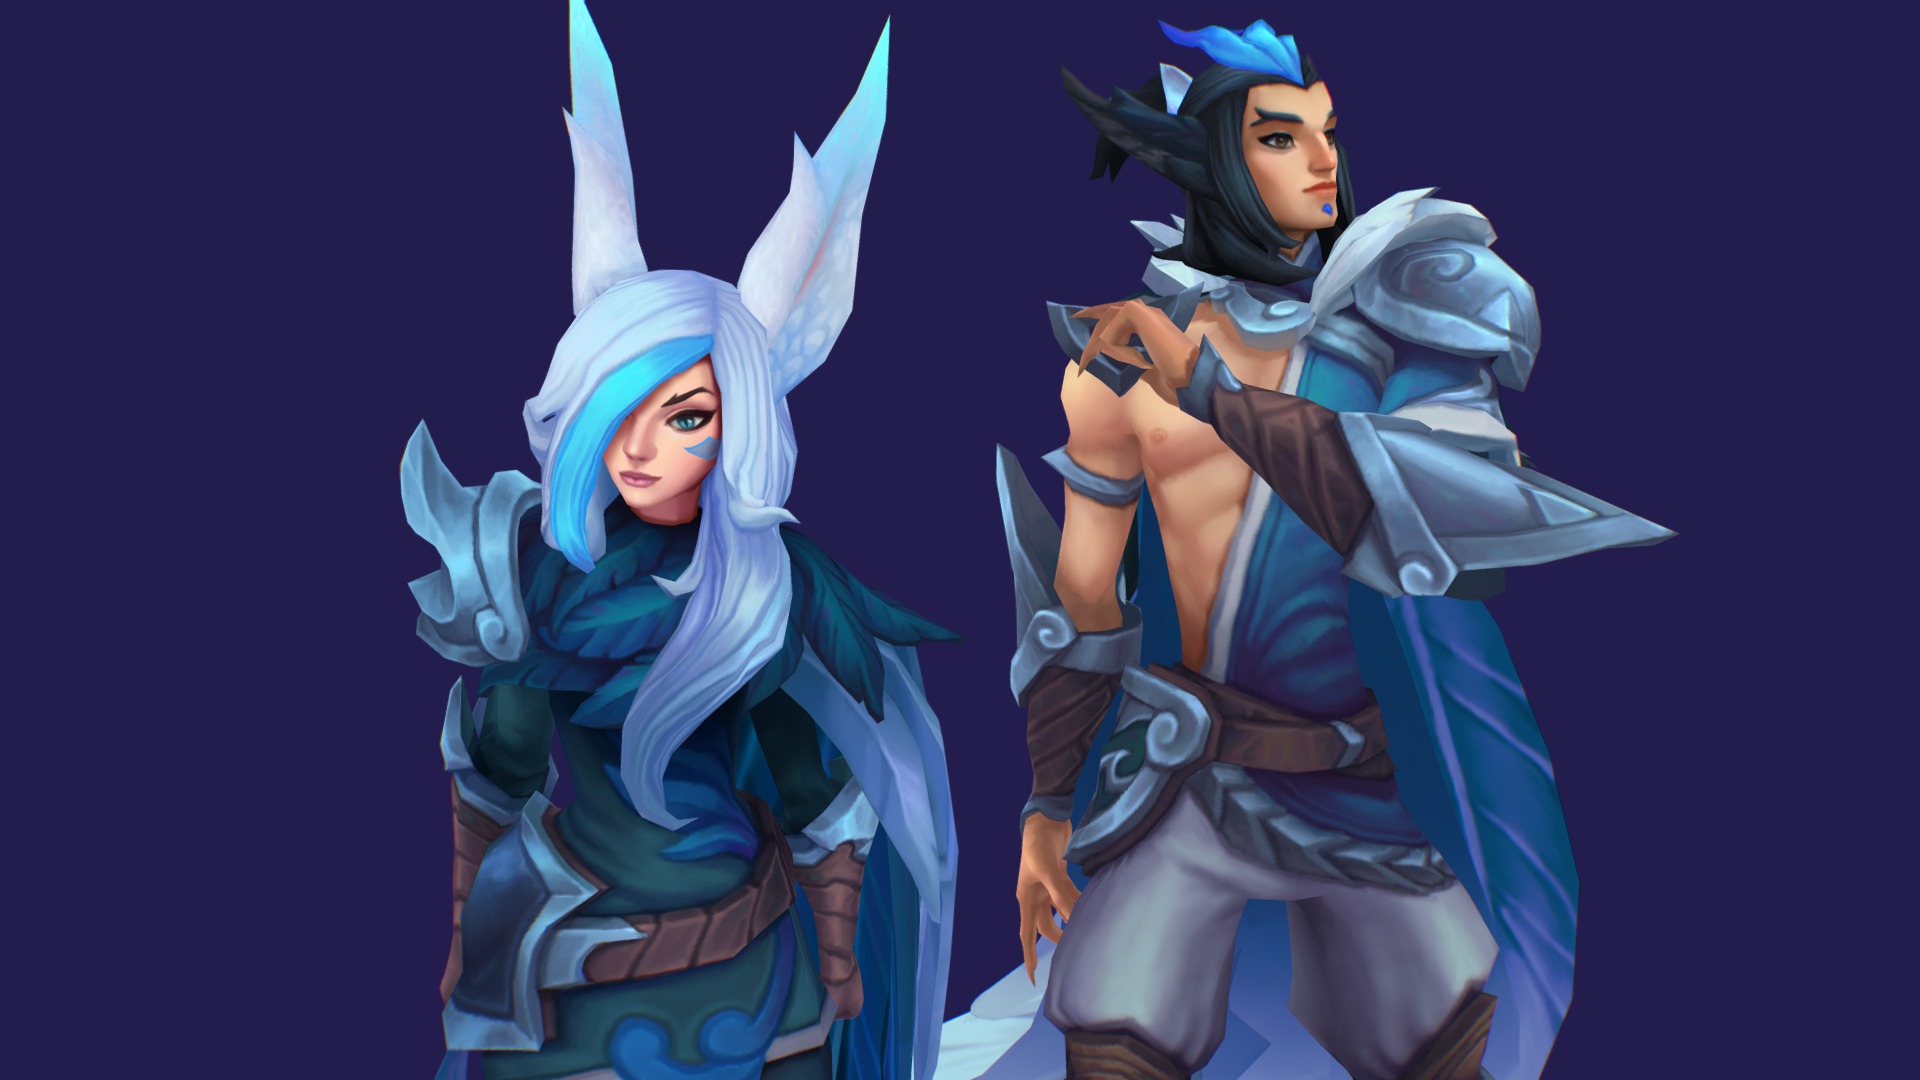 for high res shots and process gigs, check out my ArtStation: https://www.artstation.com/artwork/qaQJe

i was very fortunate to be on the squad that got to work on the Worlds 2017 winner skins for Samsung Galaxy! they wanted a Korean fantasy theme so we did our best to deliver, this is Xayah and Rakan for Ruler and CoreJJ :3  

Models and Textures by me 

Rakan flower and recall hat textures by Katey Anothony &lt;3 

Concepts: Aleksandr Nikonovv

Tech Art: Omar Garcia

Animation: Joe Han 

FX: Oli McDonald 

Sound: Alison Ho 

Splash: Rudy Siswanto + internal artists

QA: Katey Anothony 

Art Lead: Seth Haak 

DM: Corey V. and Harald Koebler

PO: Janelle Wavell-Jimenez  

Thanks for all the feedback from the character team! - Samsung Galaxy Xayah and Rakan - 3D model by ybourykina 3d model